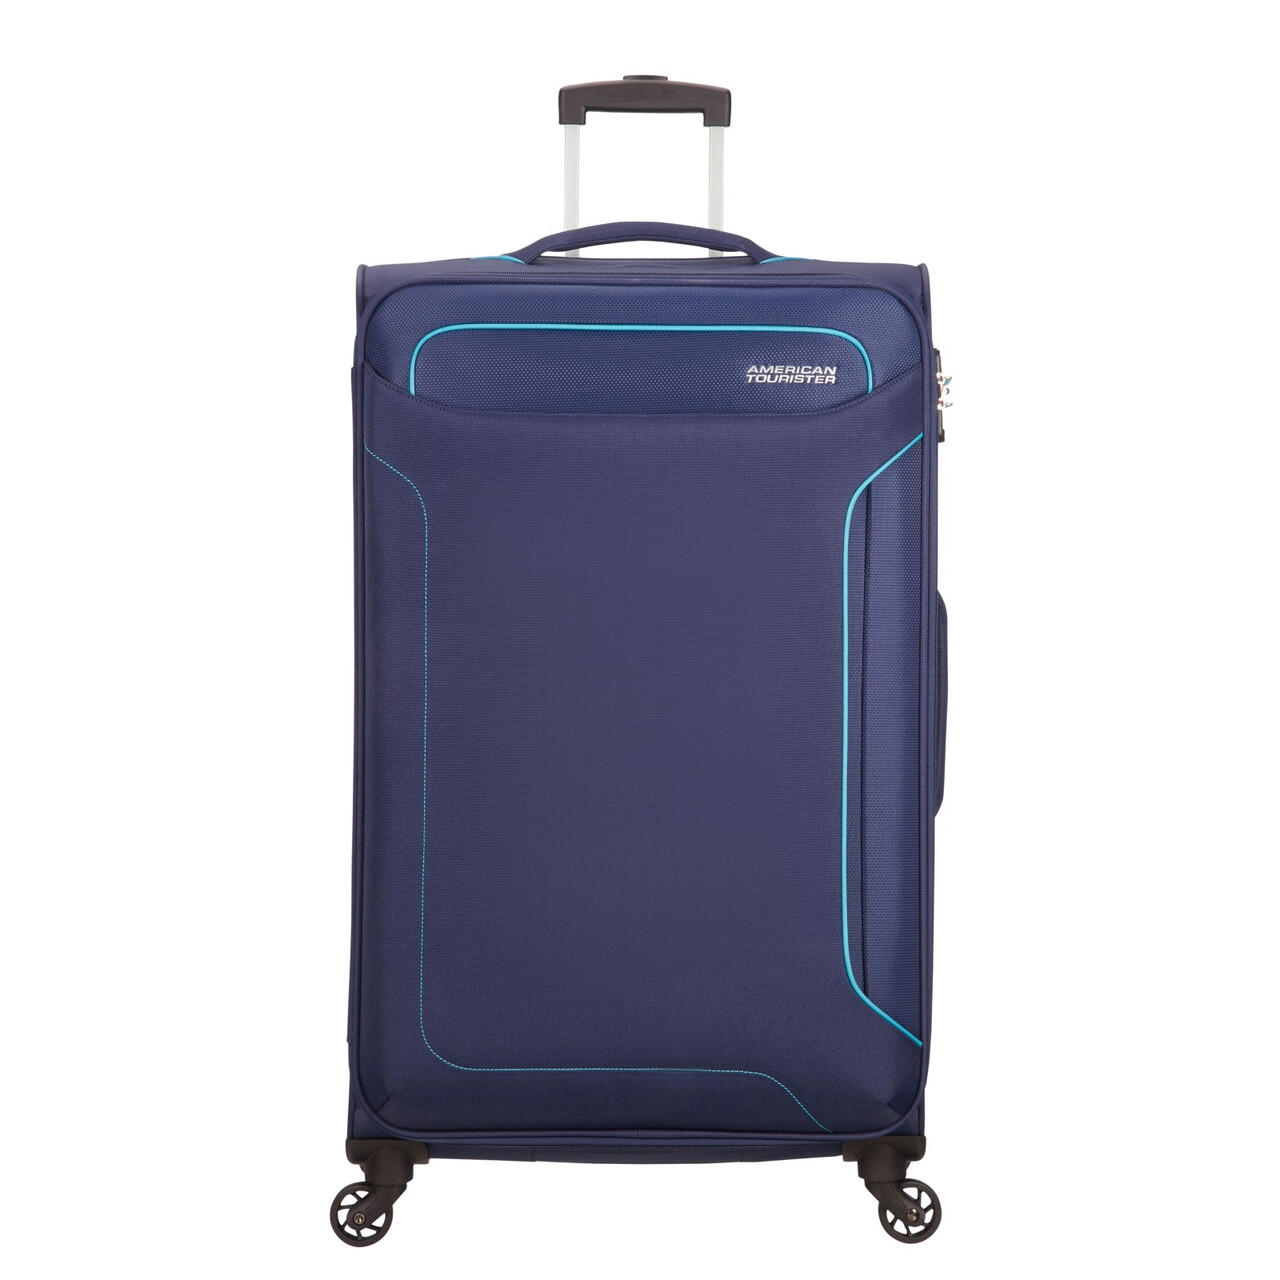 AMERICAN TOURISTER Holiday Heat 4 Wheel Suitcase - 79cm - Navy